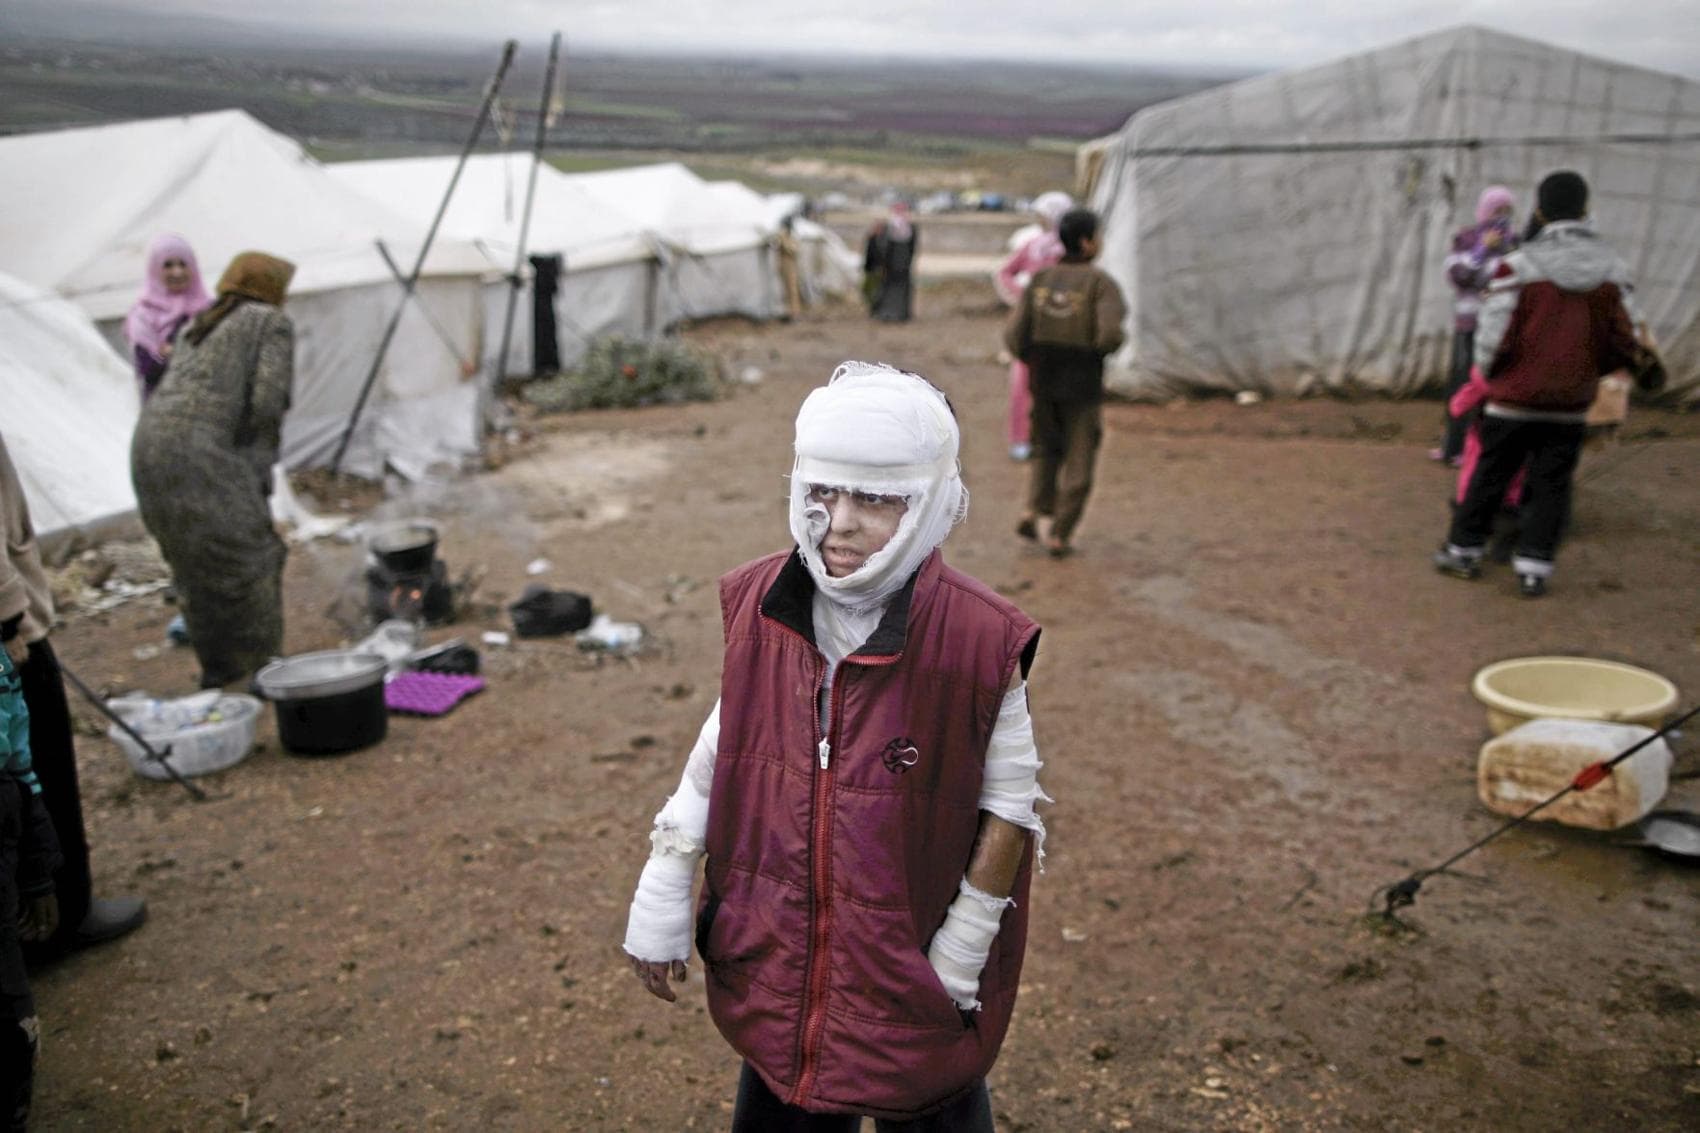 Abdullah Ahmed, 10, who suffered burns in a Syrian government airstrike and fled his home with his family, stands outside their tent at a camp for displaced Syrians in the village of Atmeh, Syria, Dec. 11, 2012. (Muhammed Muheisen, Associated Press - December 11, 2012)